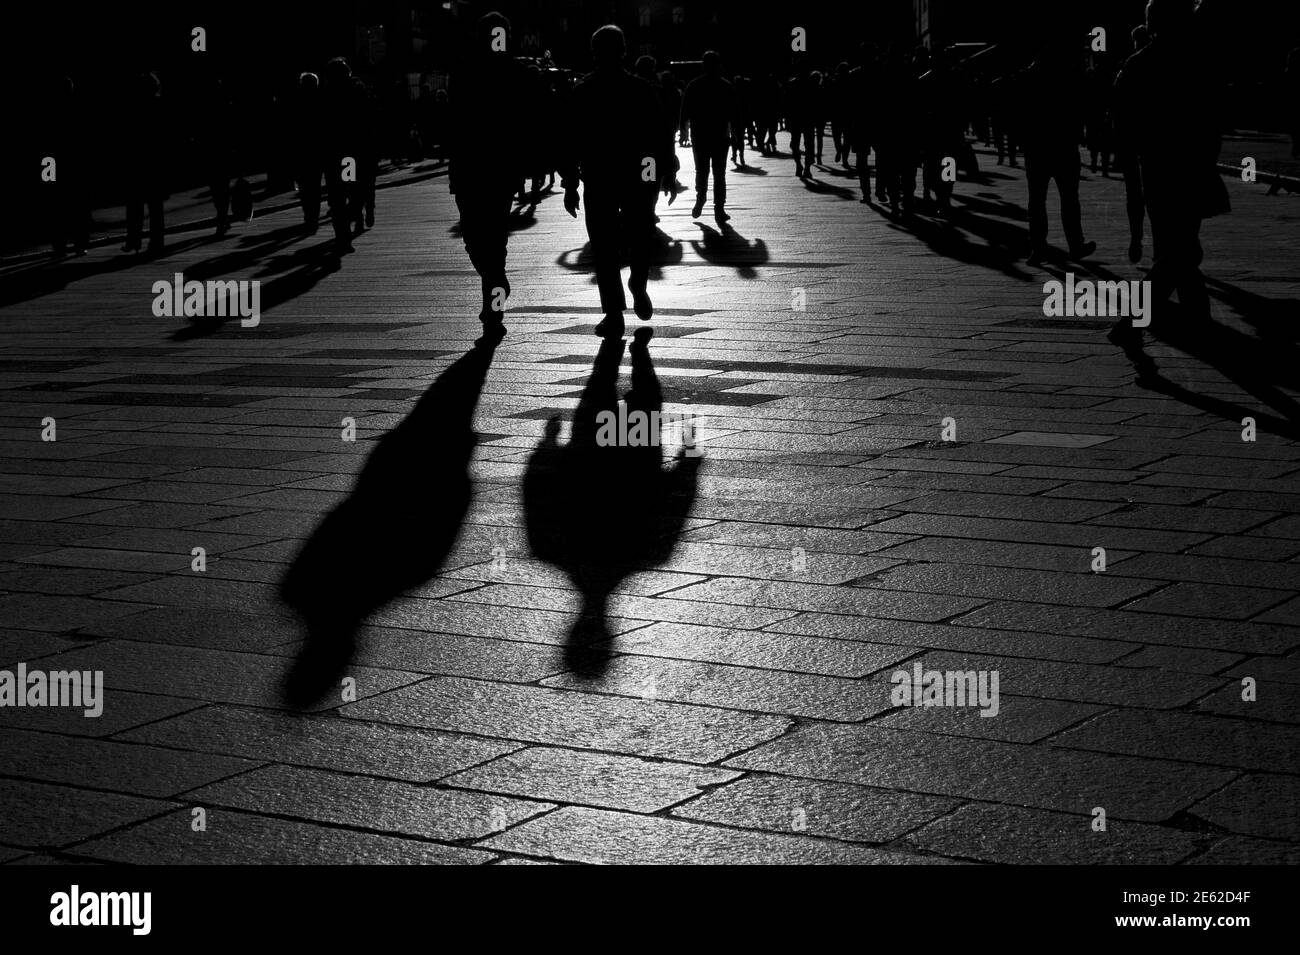 Shadows of people walking at sunset on the stone floor of the pre-pandemic city of Milan, Lombardy, Italy Stock Photo